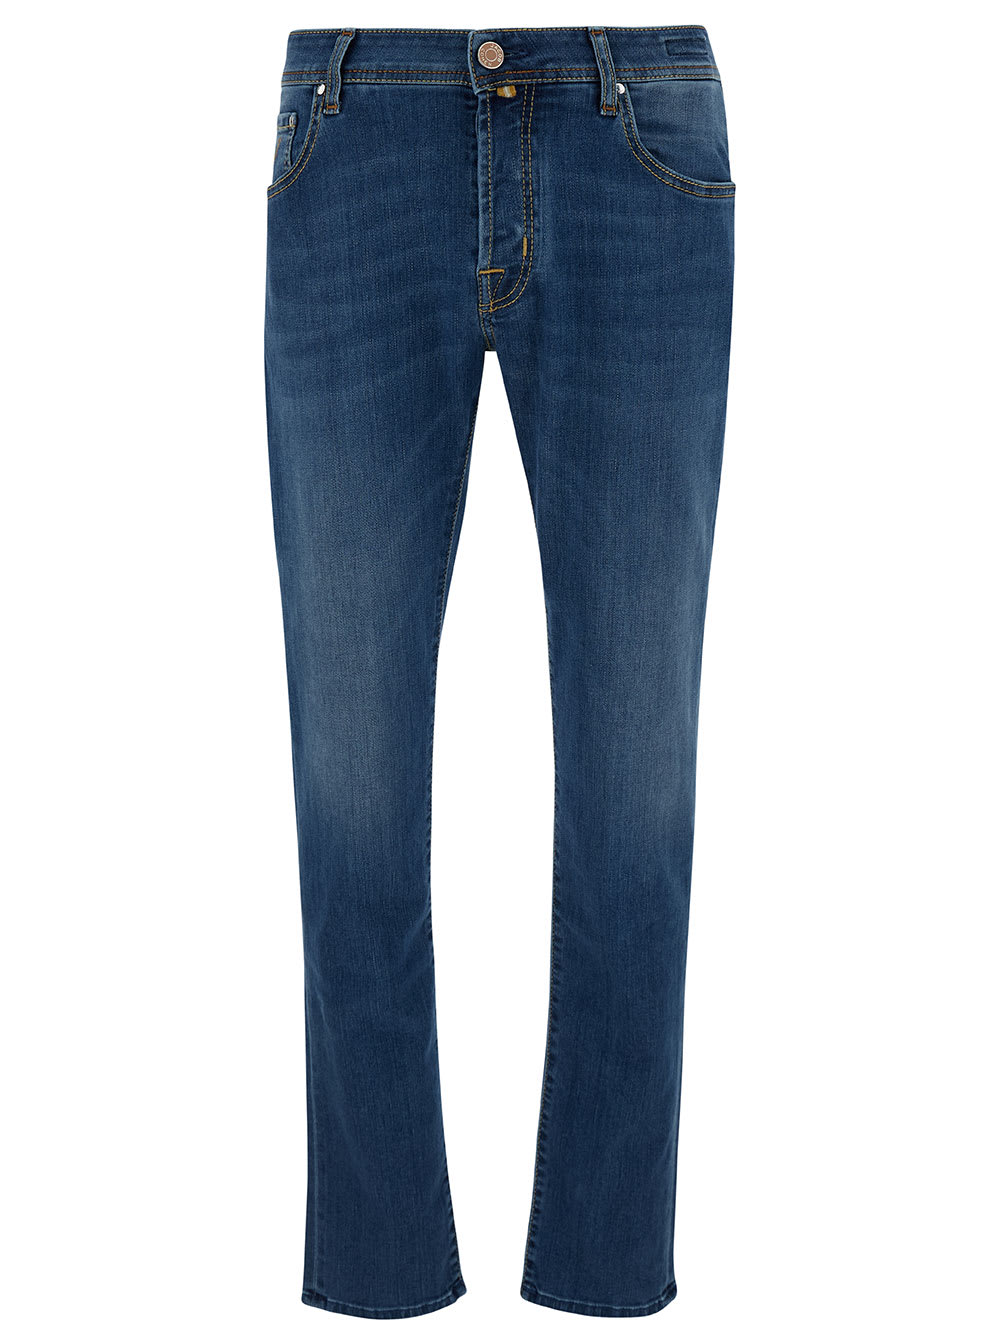 Blue Slim Low Waisted Jeans With Patch In Cotton Denim Man Jeans